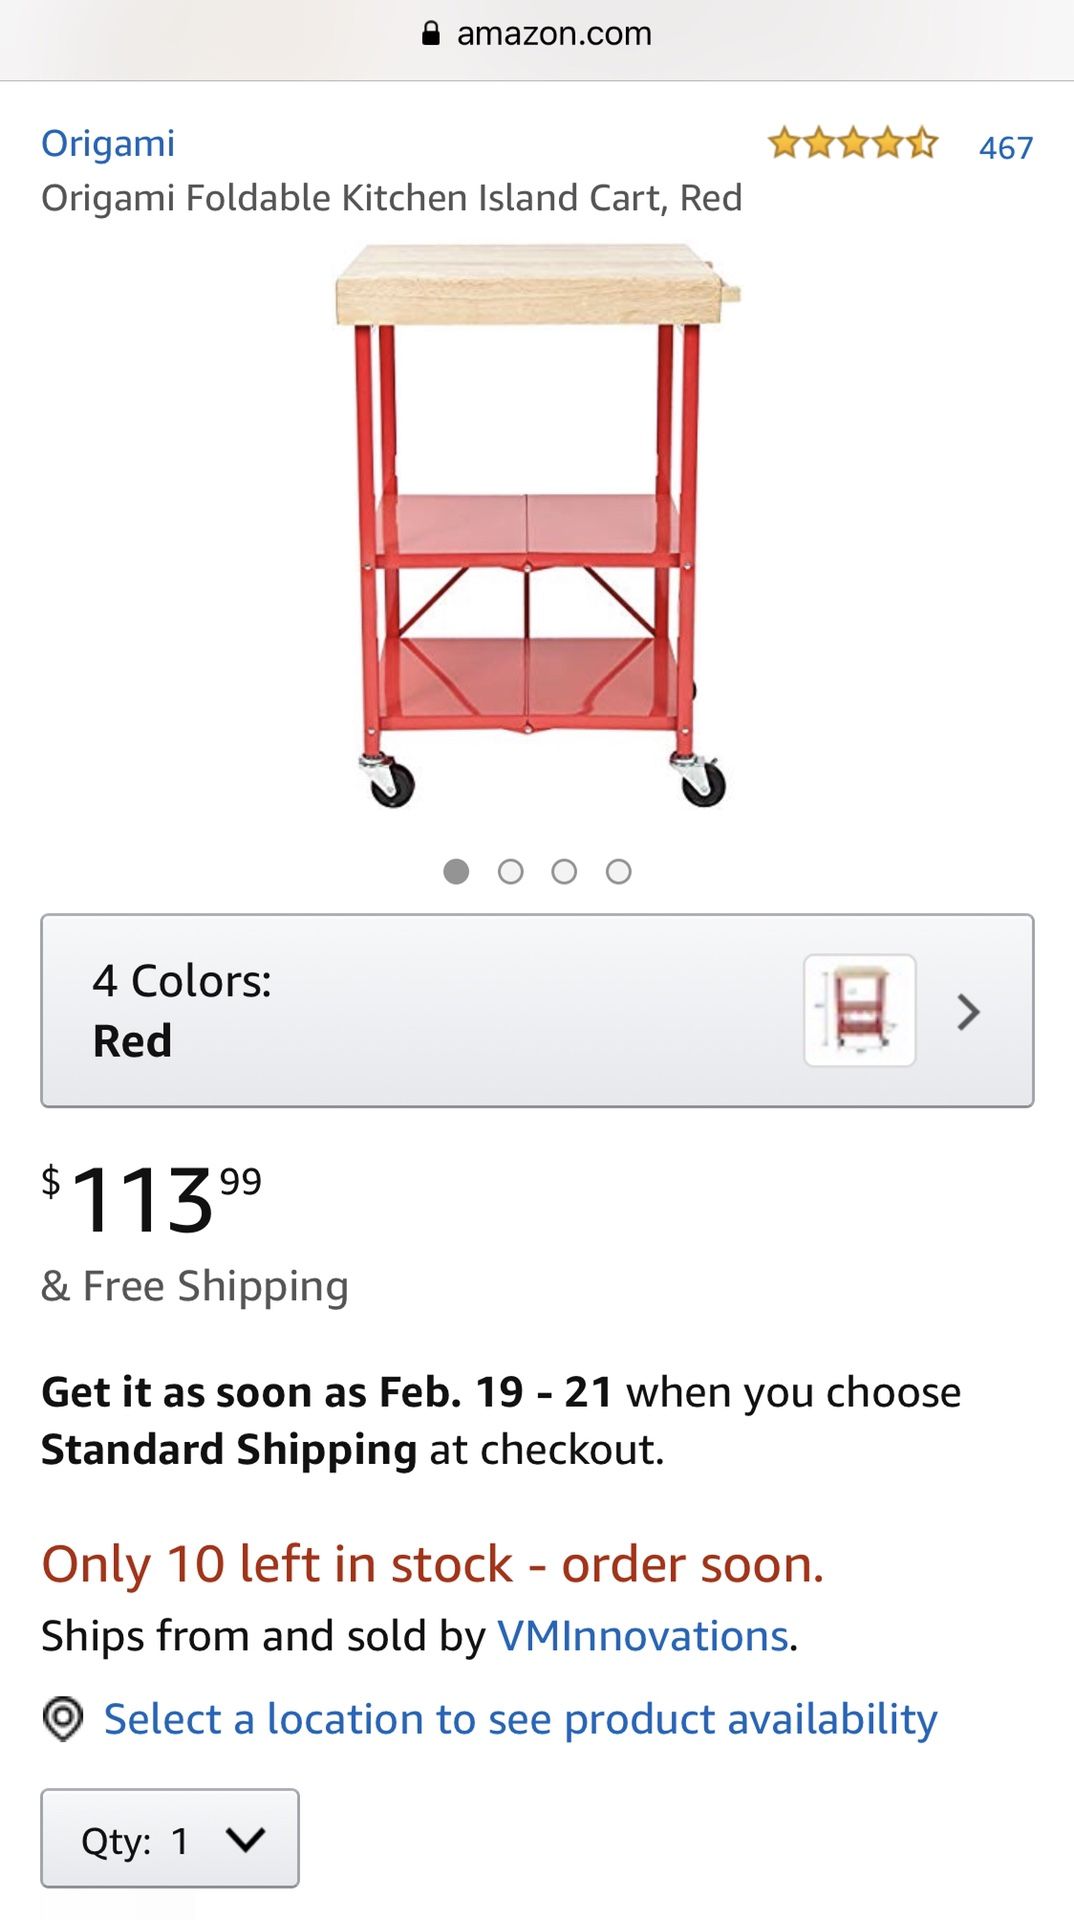 New Origami Foldable Kitchen Island Cart, Red rbt-06